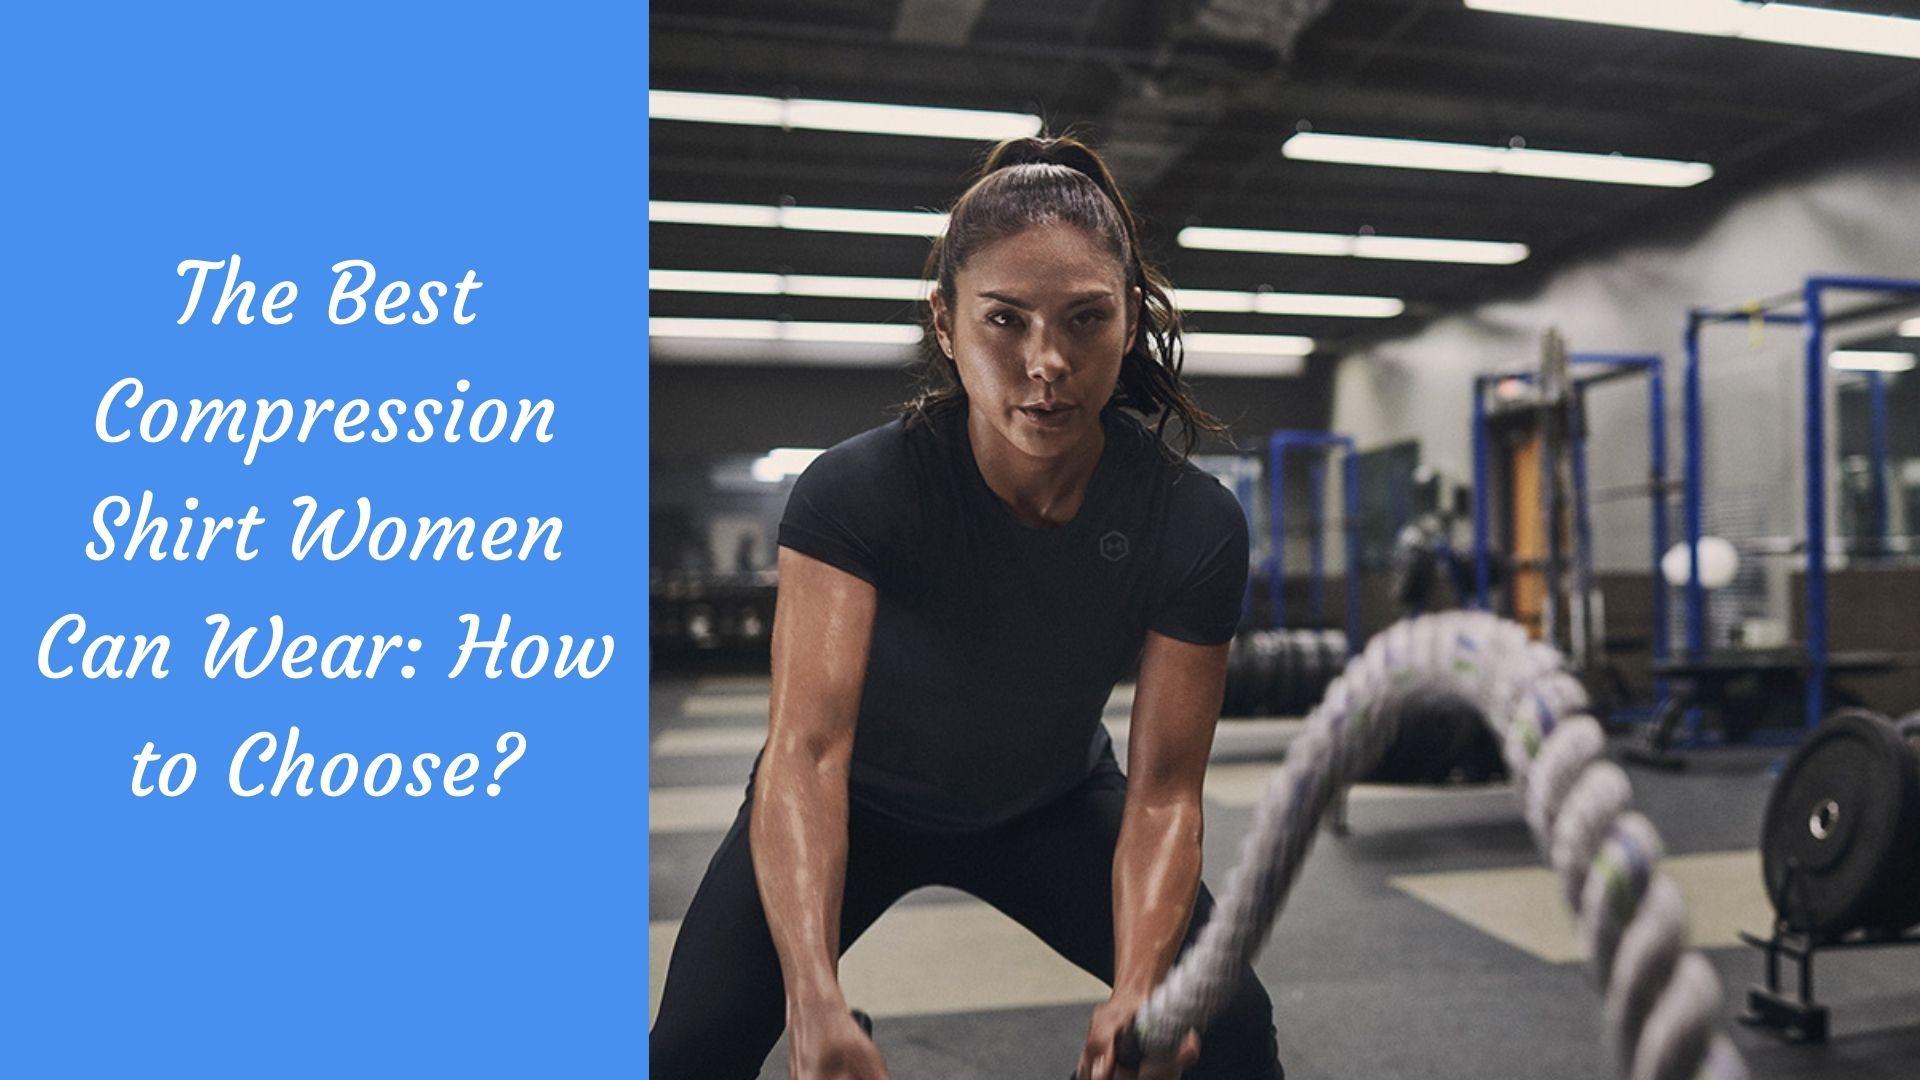 The Best Compression Shirt Women Can Wear: How to Choose? - The